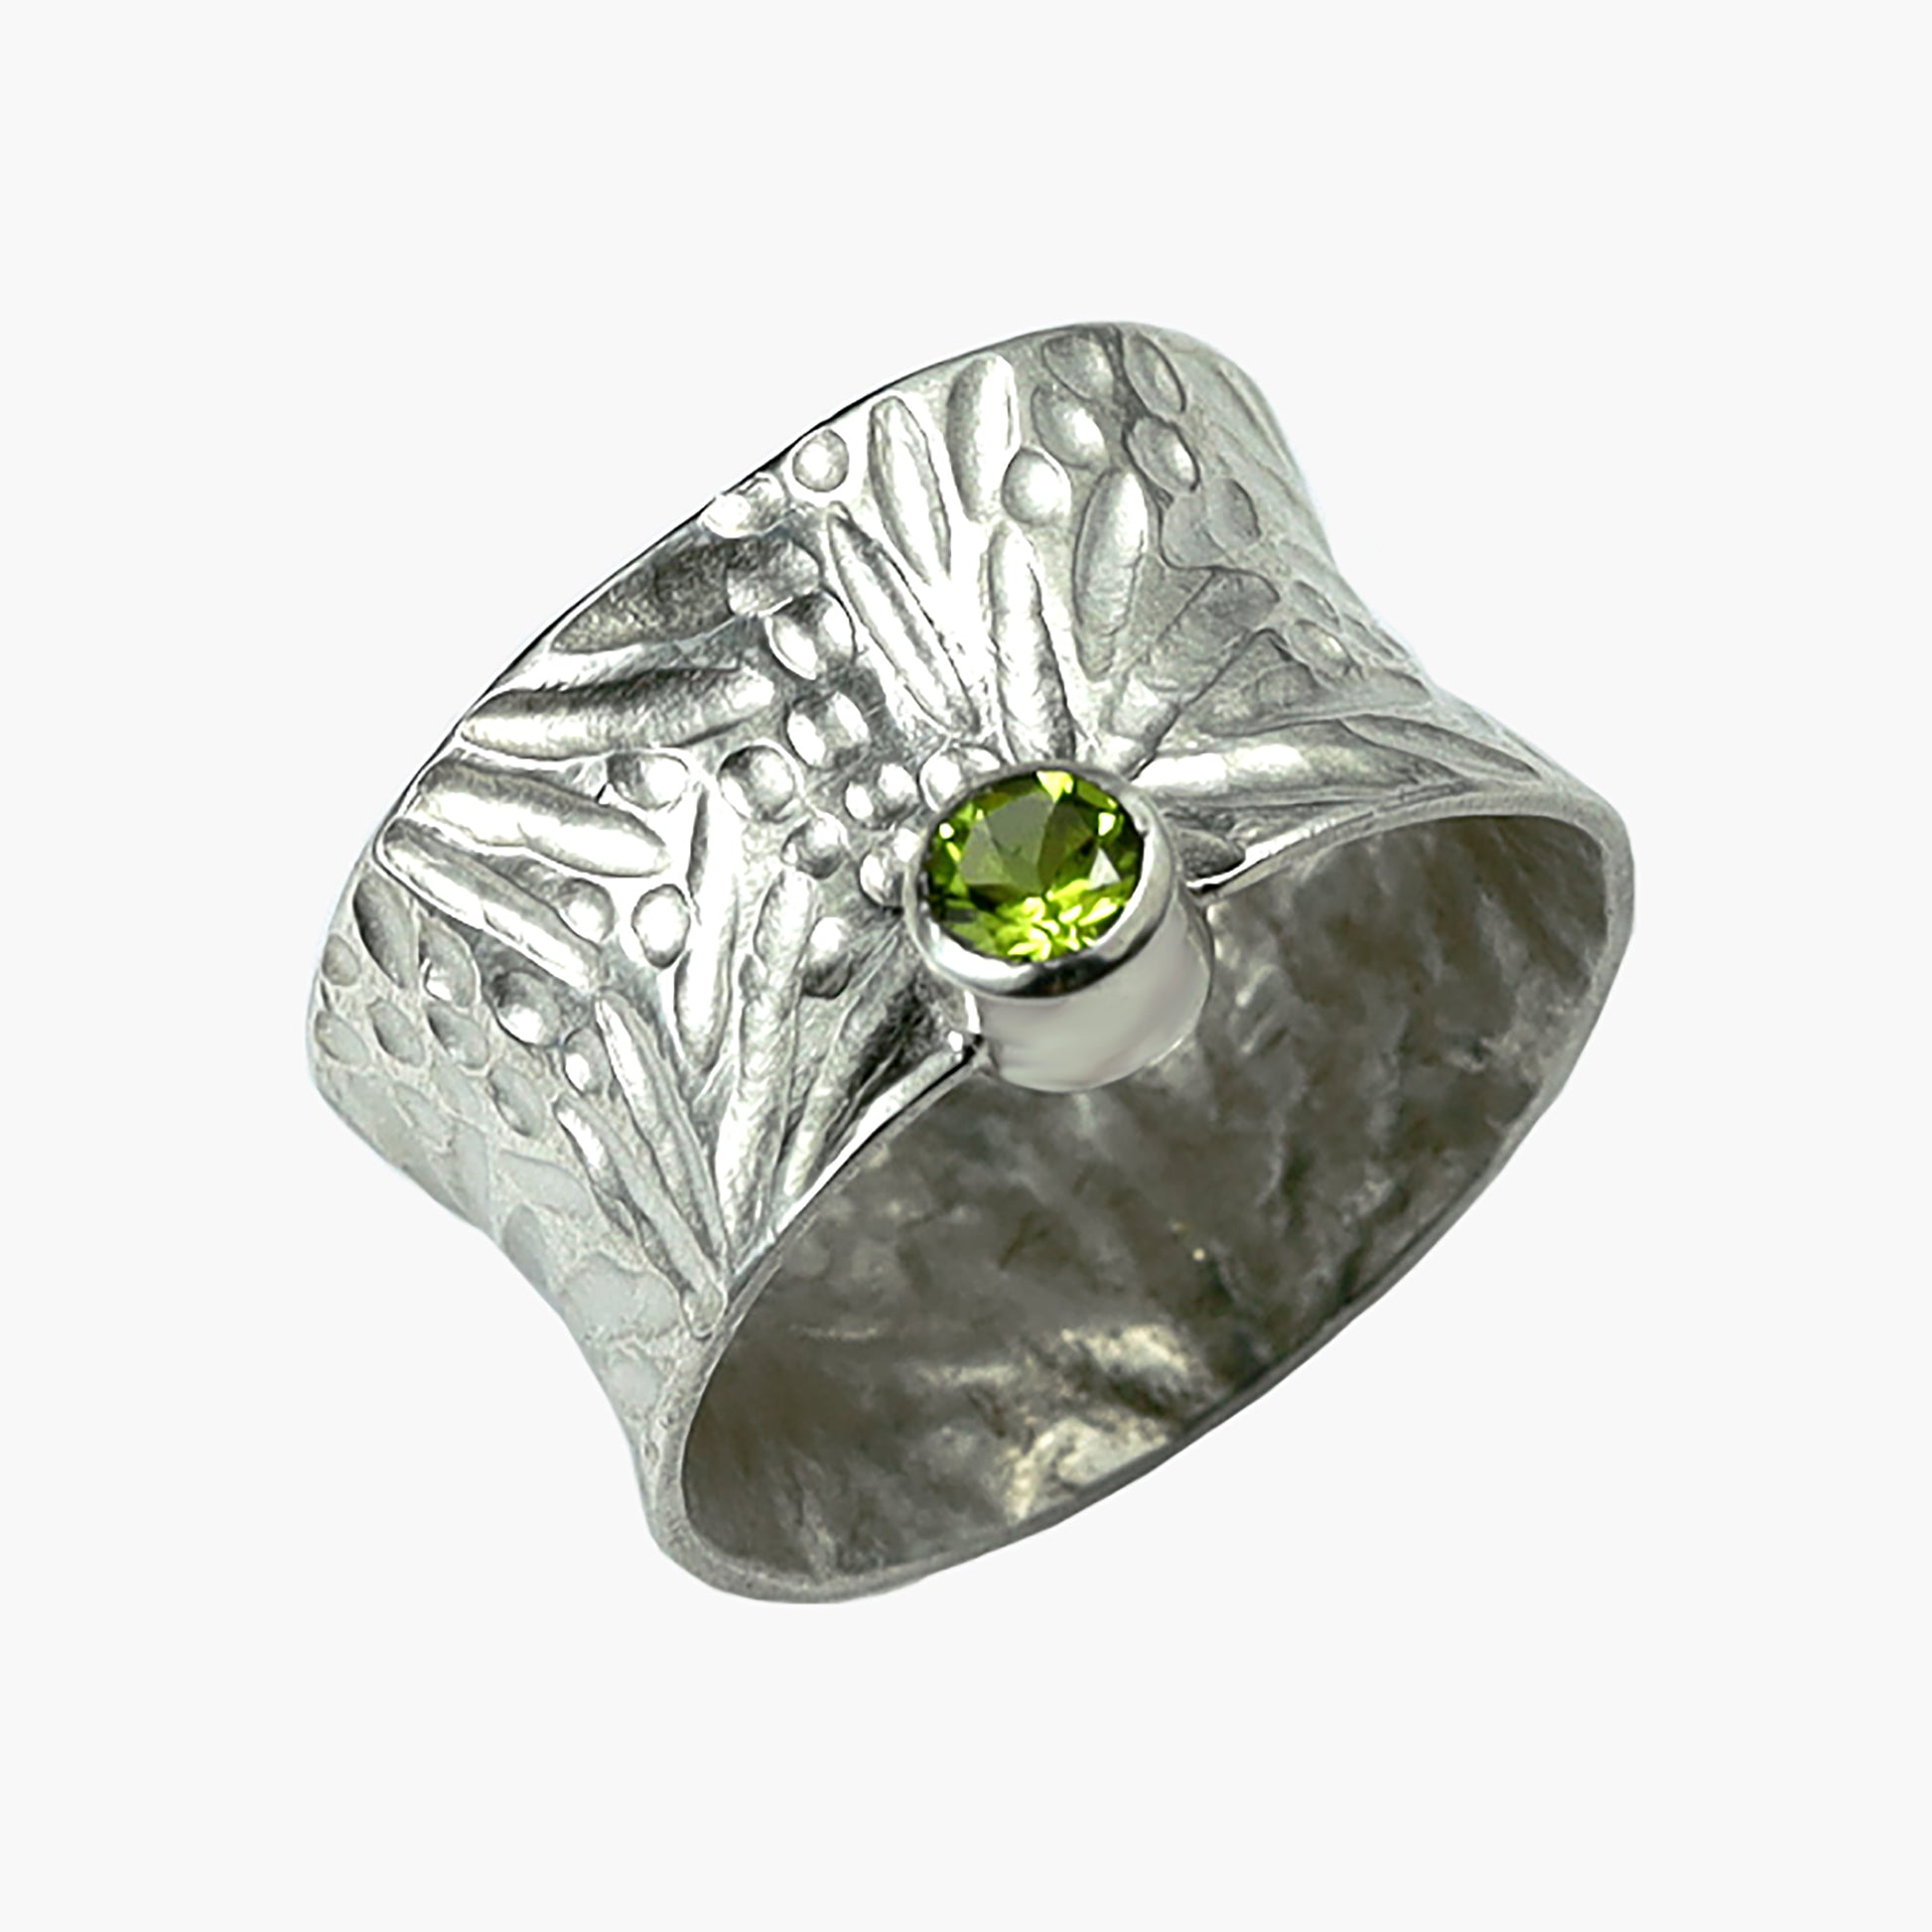 Close-up of the 'Spring' sterling silver ring by Erin Christensen, showcasing a wide band with a textured burst design, highlighted by a vibrant gemstone. The convex shape and intricate hand-chased detailing add to its unique aesthetic. Available in two sizes with gemstone options including bright green peridot.